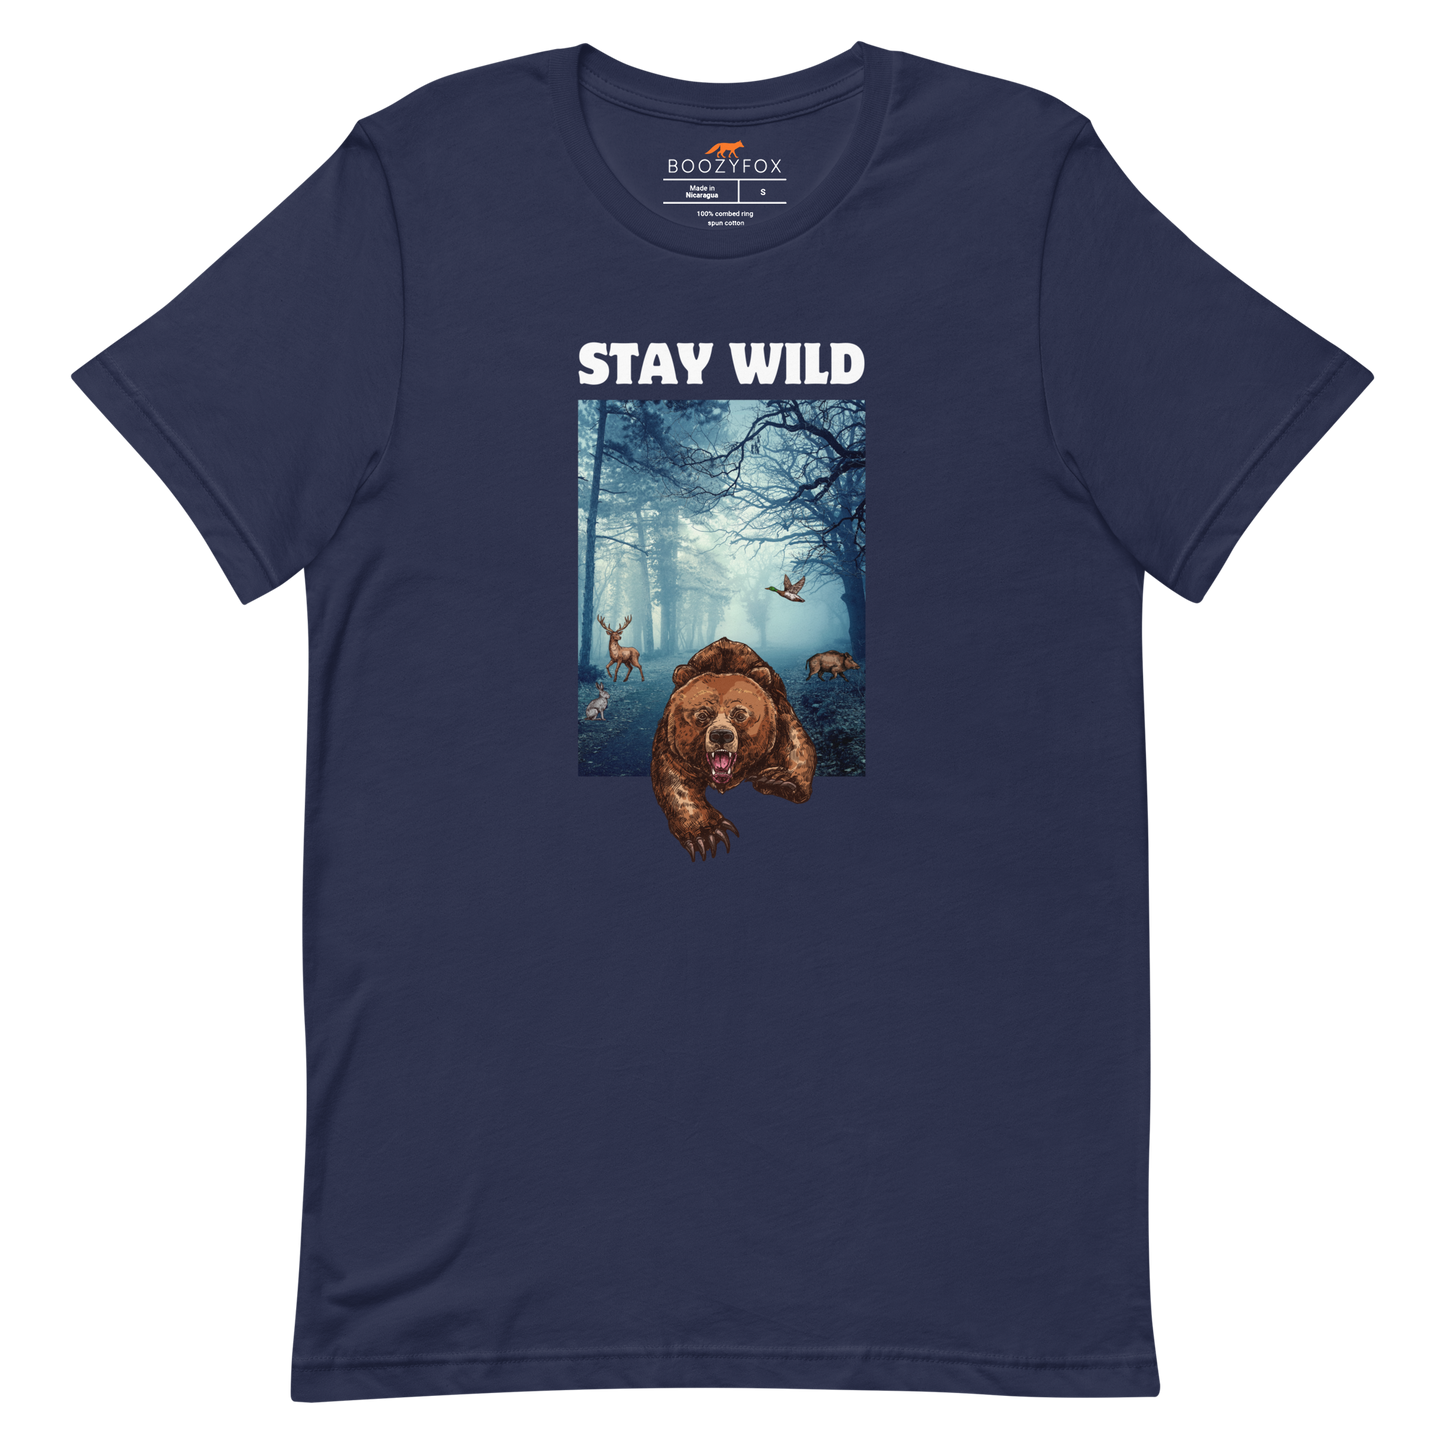 Navy Premium Bear Tee featuring a Stay Wild graphic on the chest - Cool Graphic Bear Tees - Boozy Fox